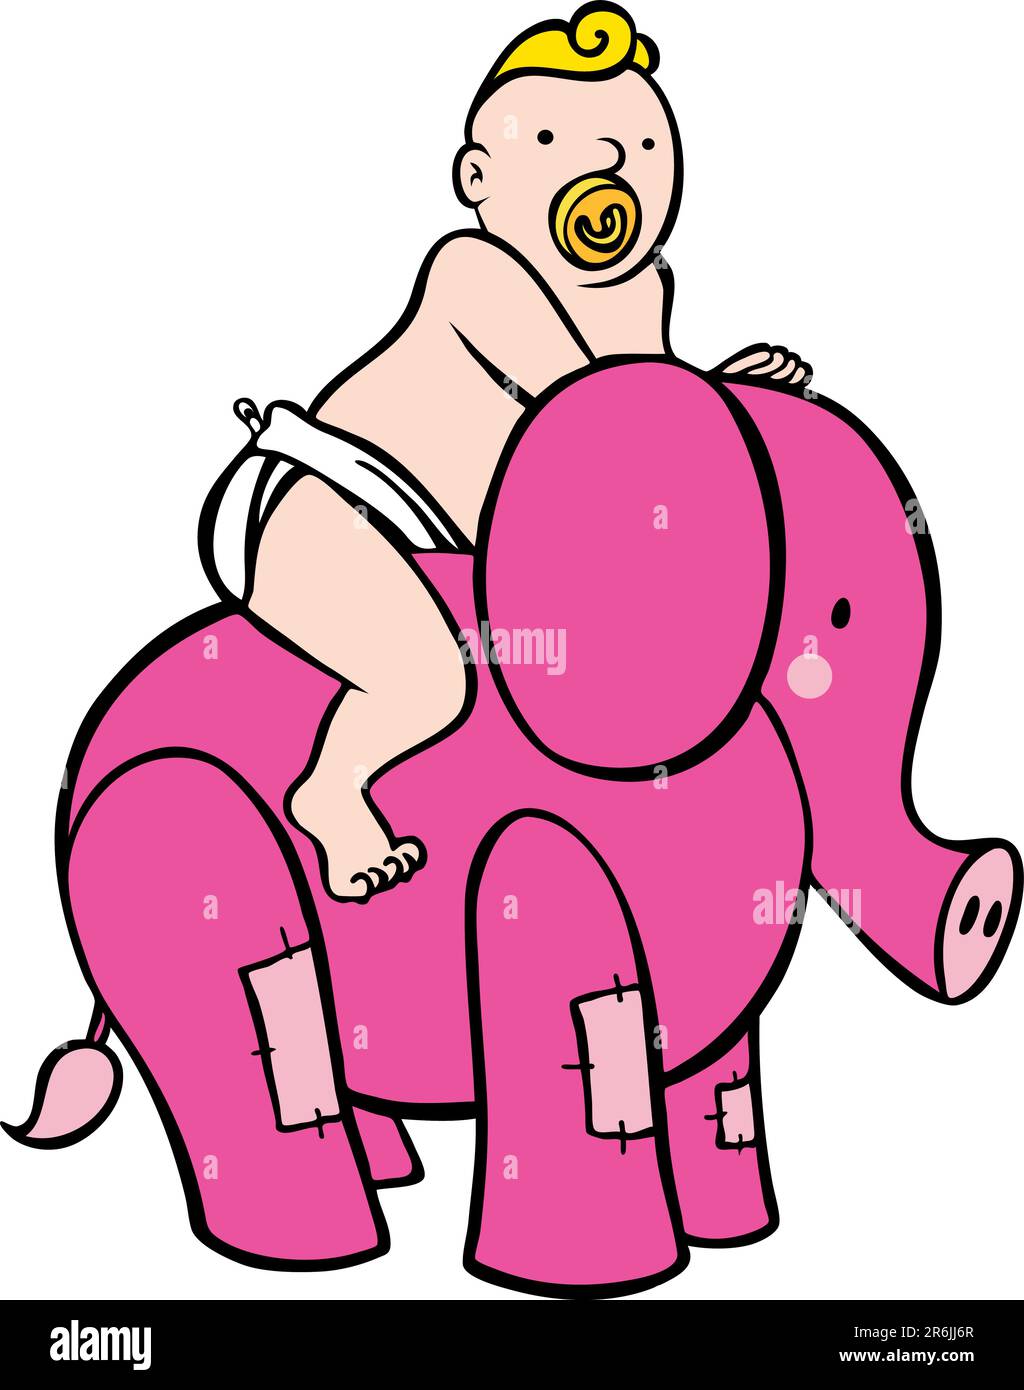 An image of a baby riding a stuffed elephant toy. Stock Vector